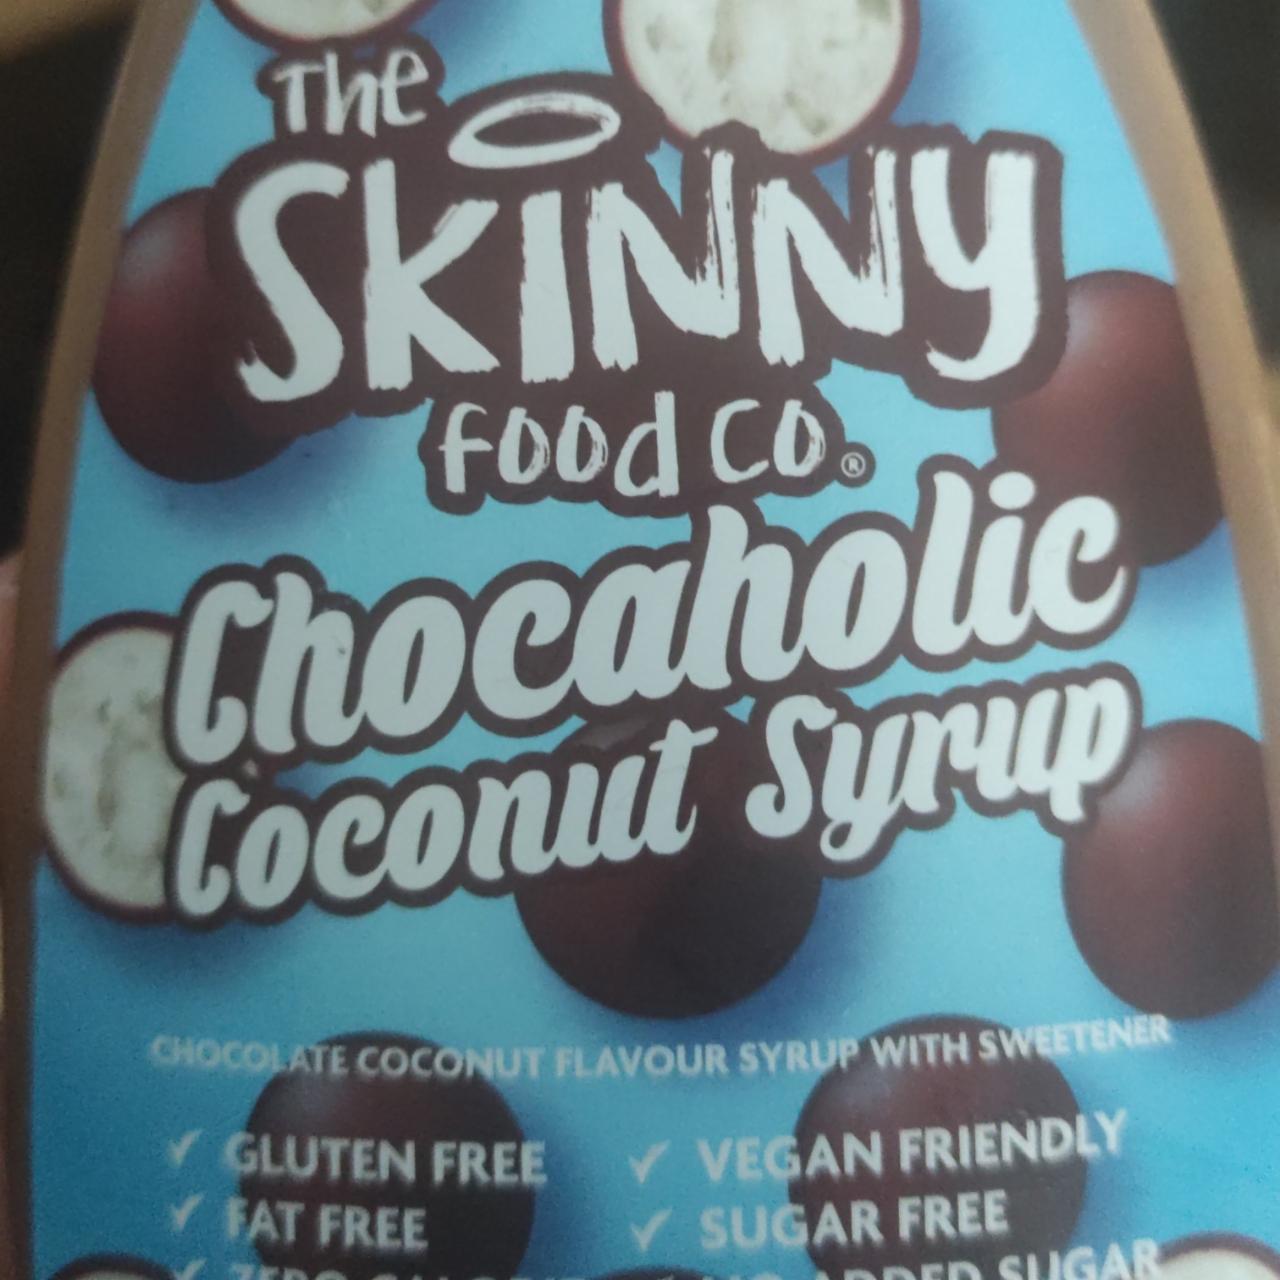 Fotografie - Chocaholic coconut syrup The Skinny Food Co